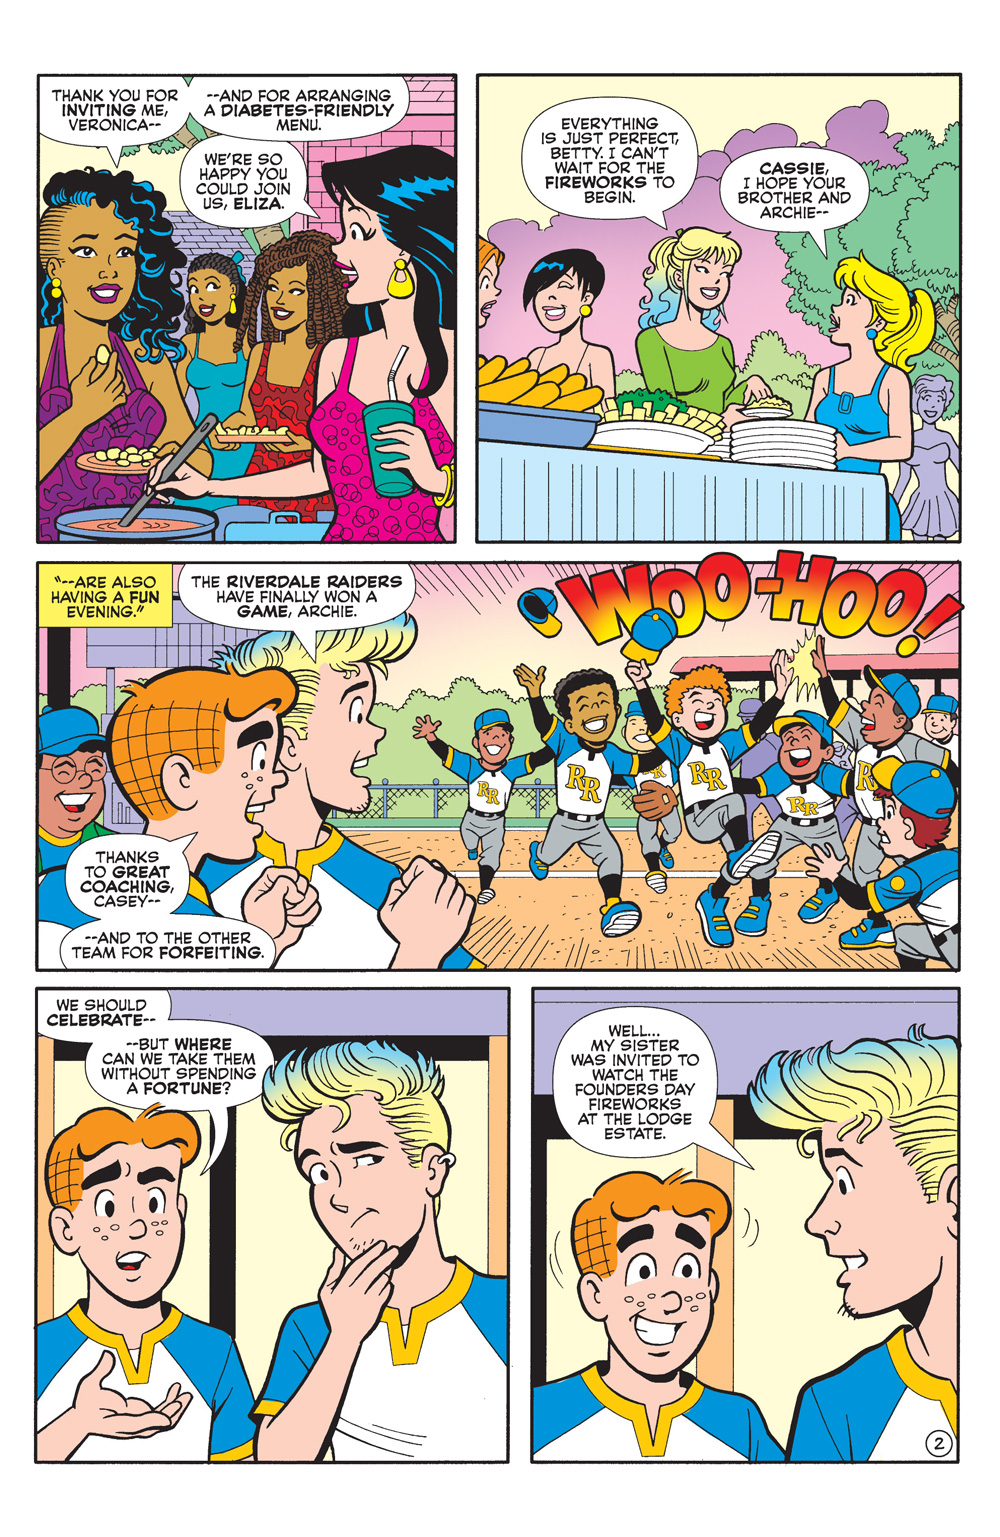 An interior story page from BETTY & VERONICA SUMMER SPECTACULAR.